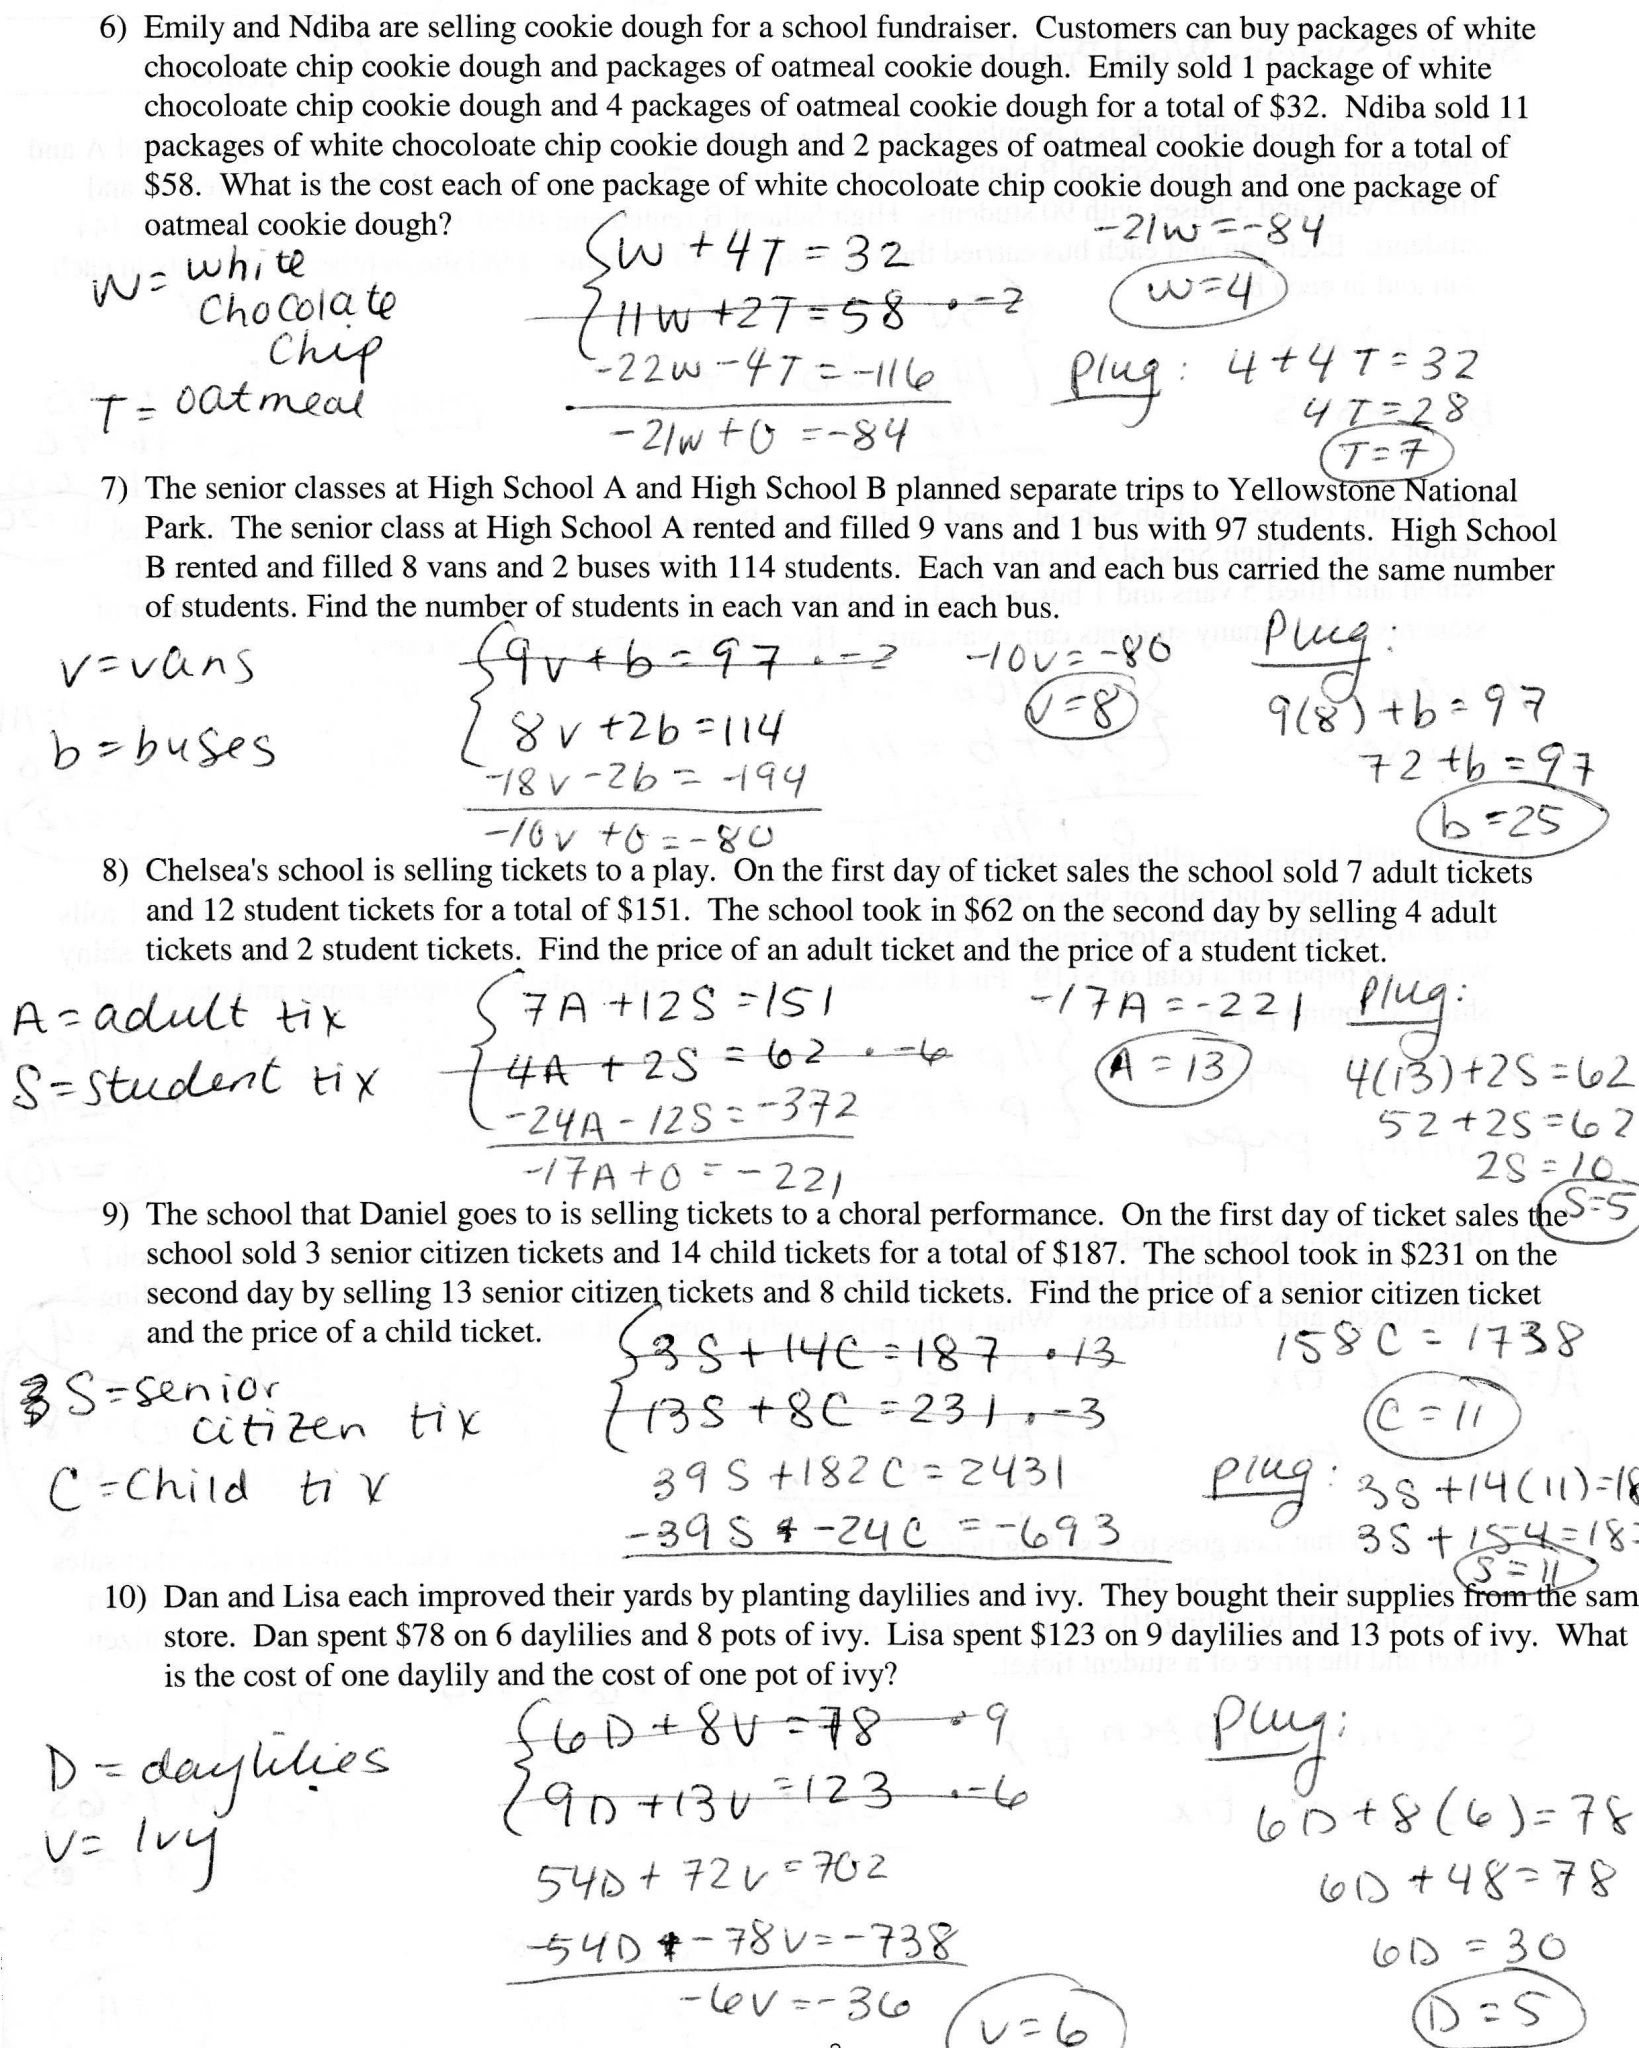 Worksheet Calculations Involving Specific Heat and Heating Curve Worksheet Answers Awesome Key Calculations Involving